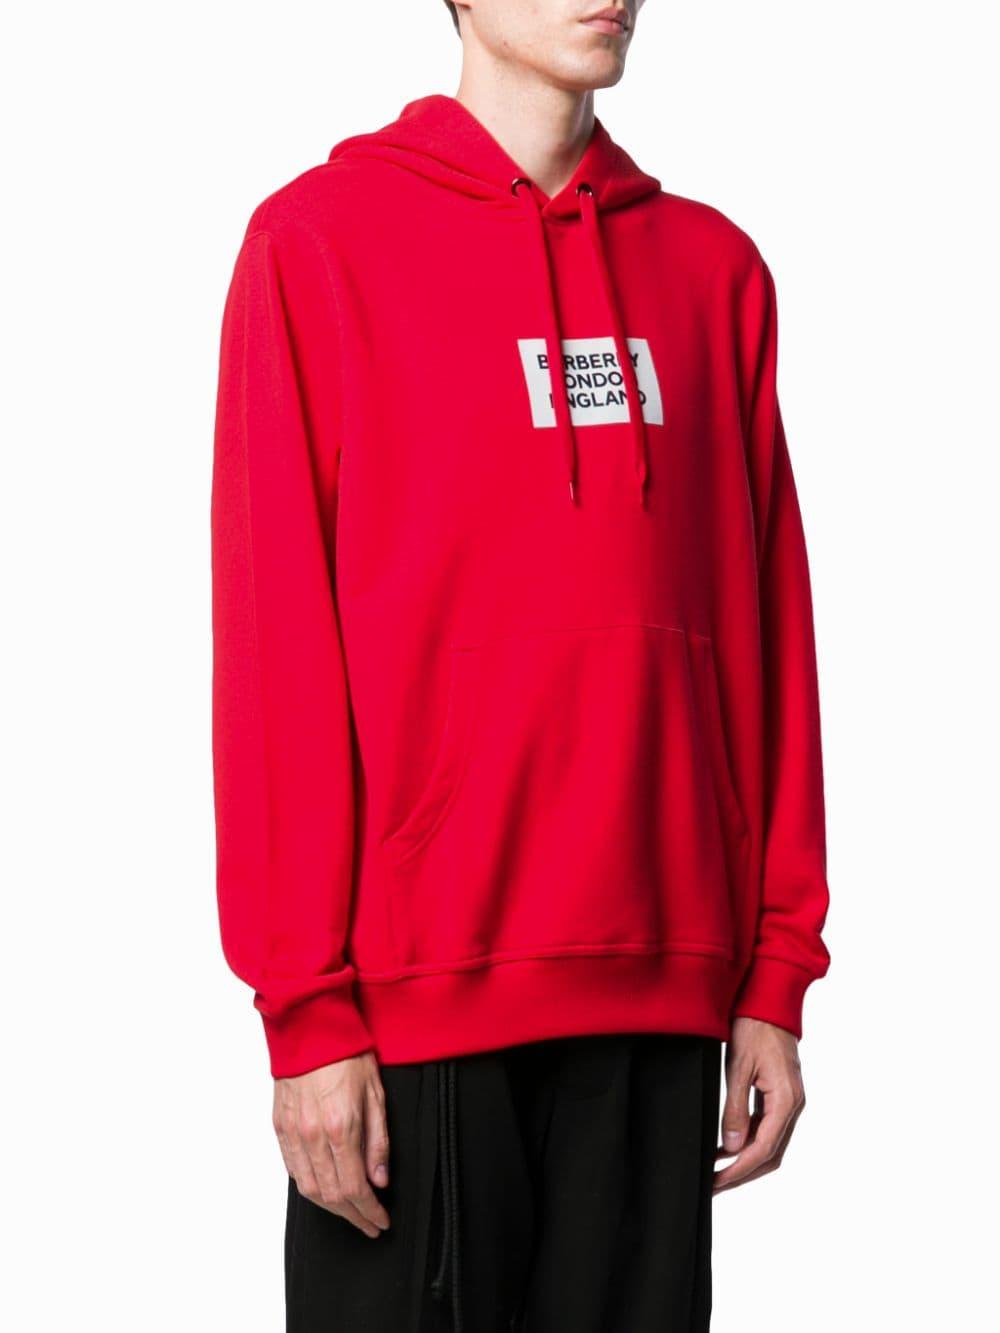 Burberry Cotton London England Patch Hoodie in Red for Men - Lyst